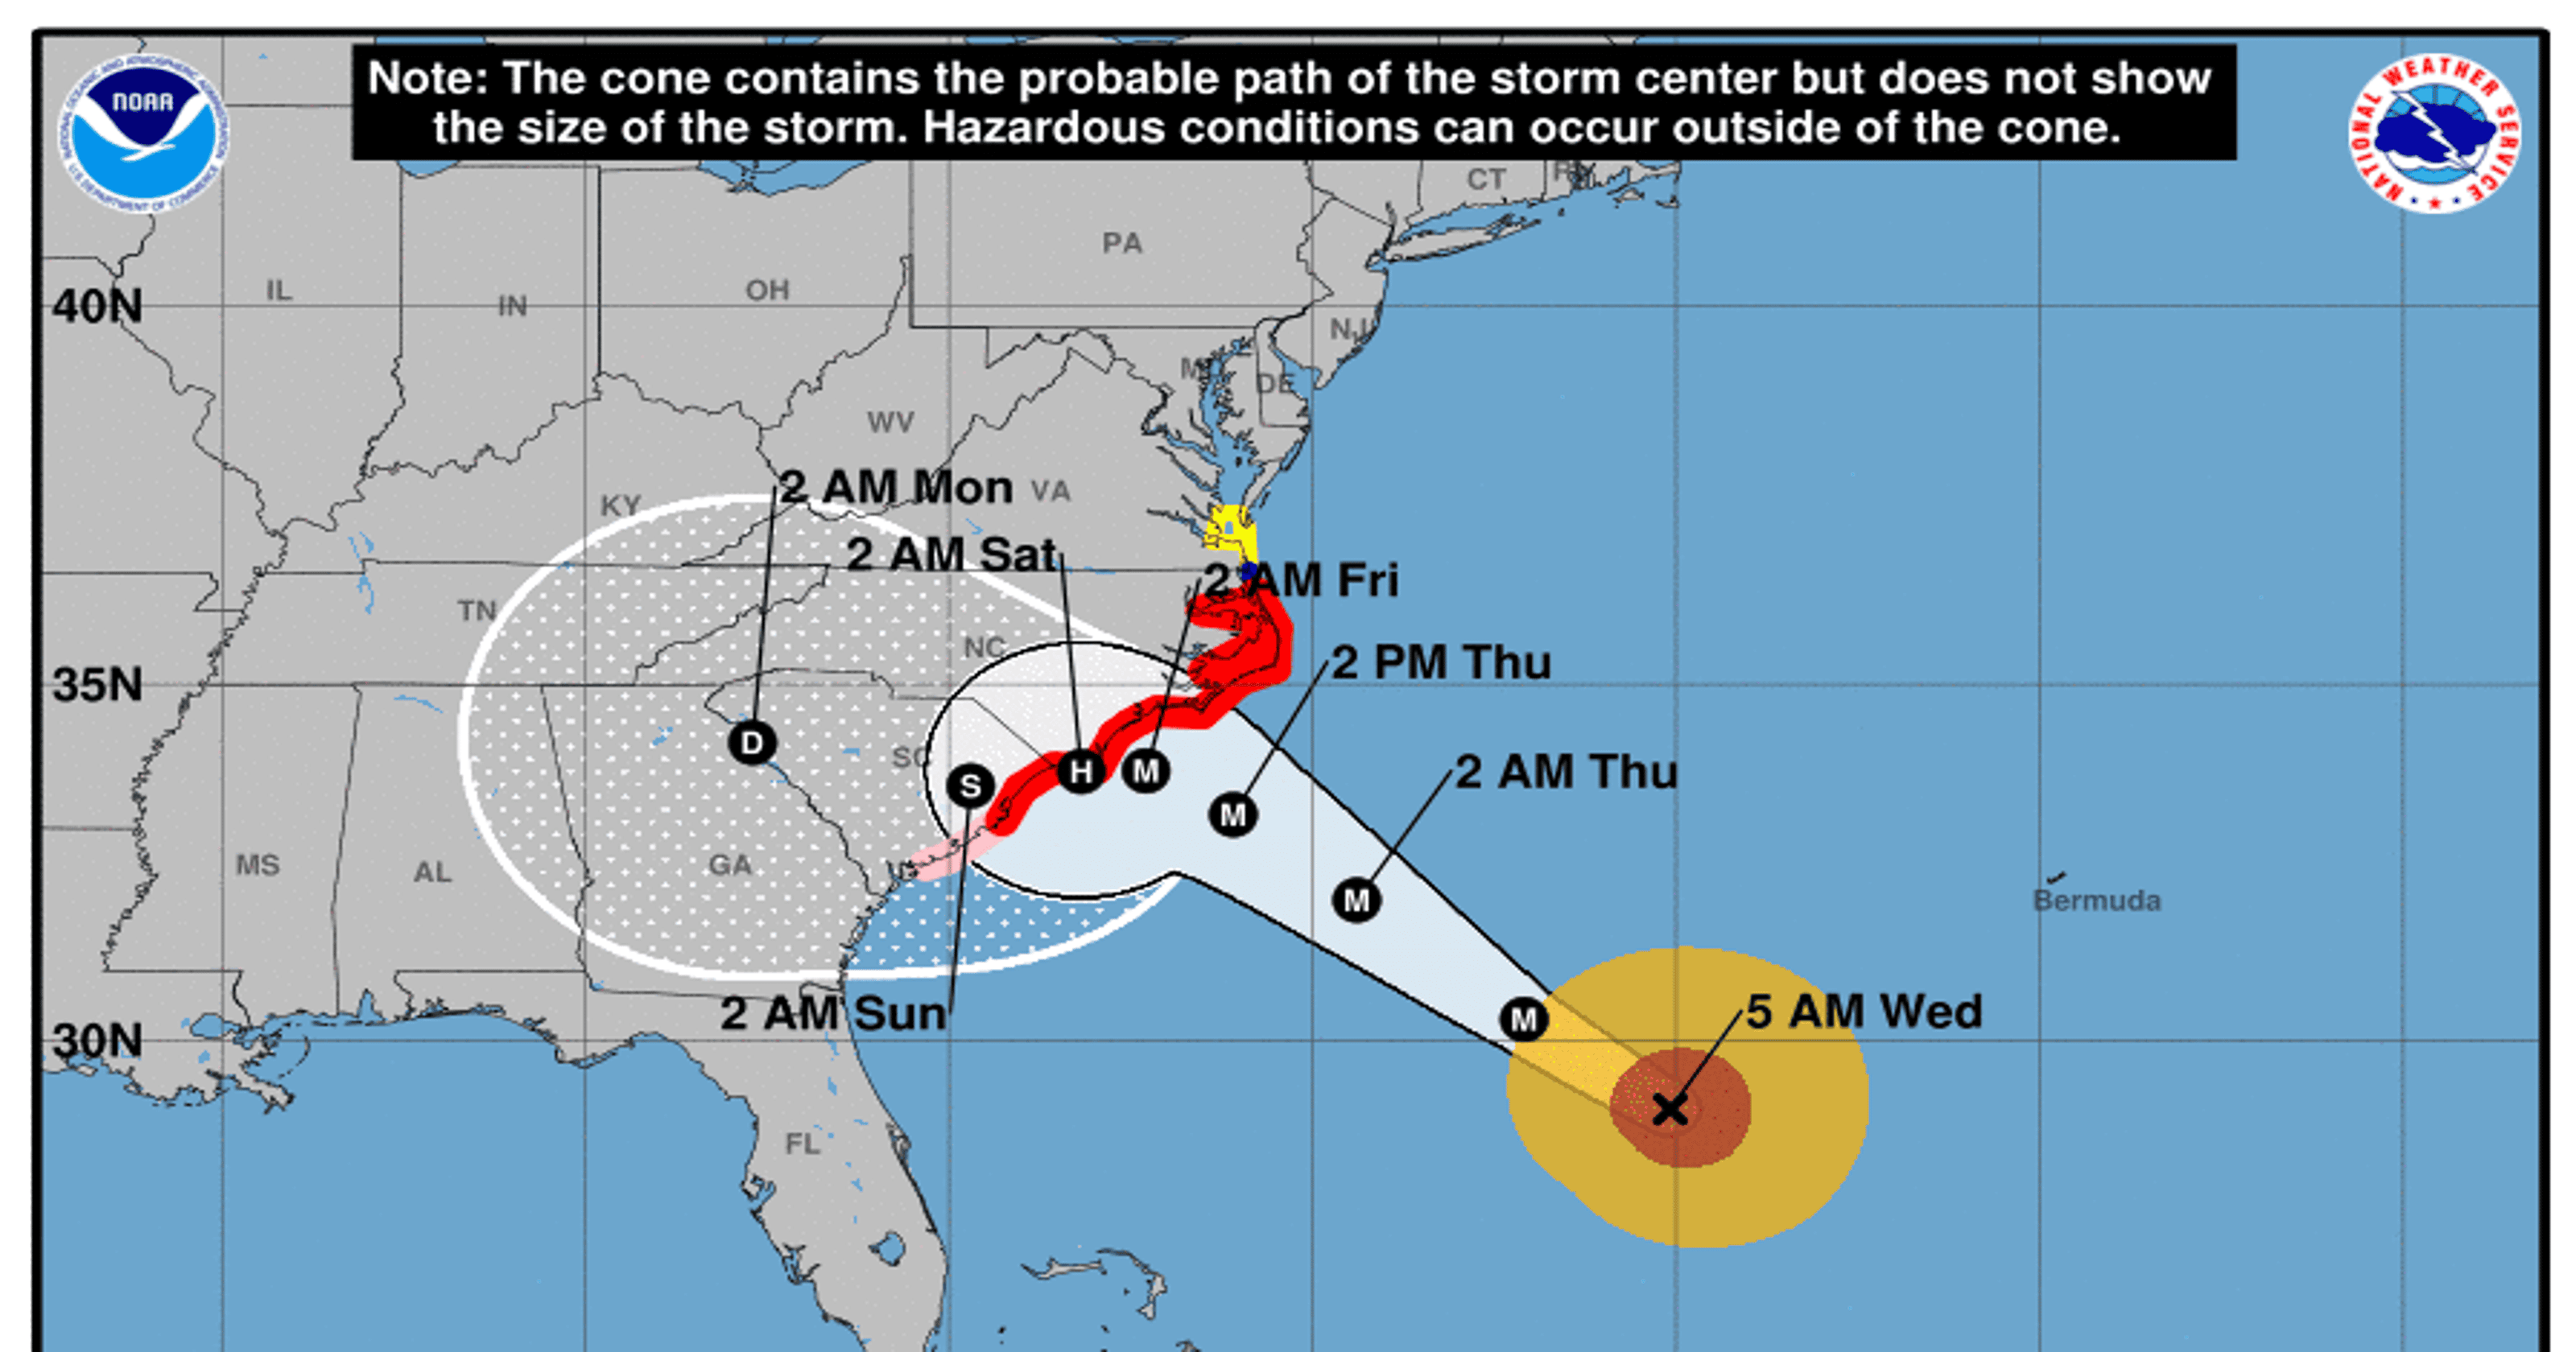 Hurricane Florence path shifts Weather impacts under new forecast track